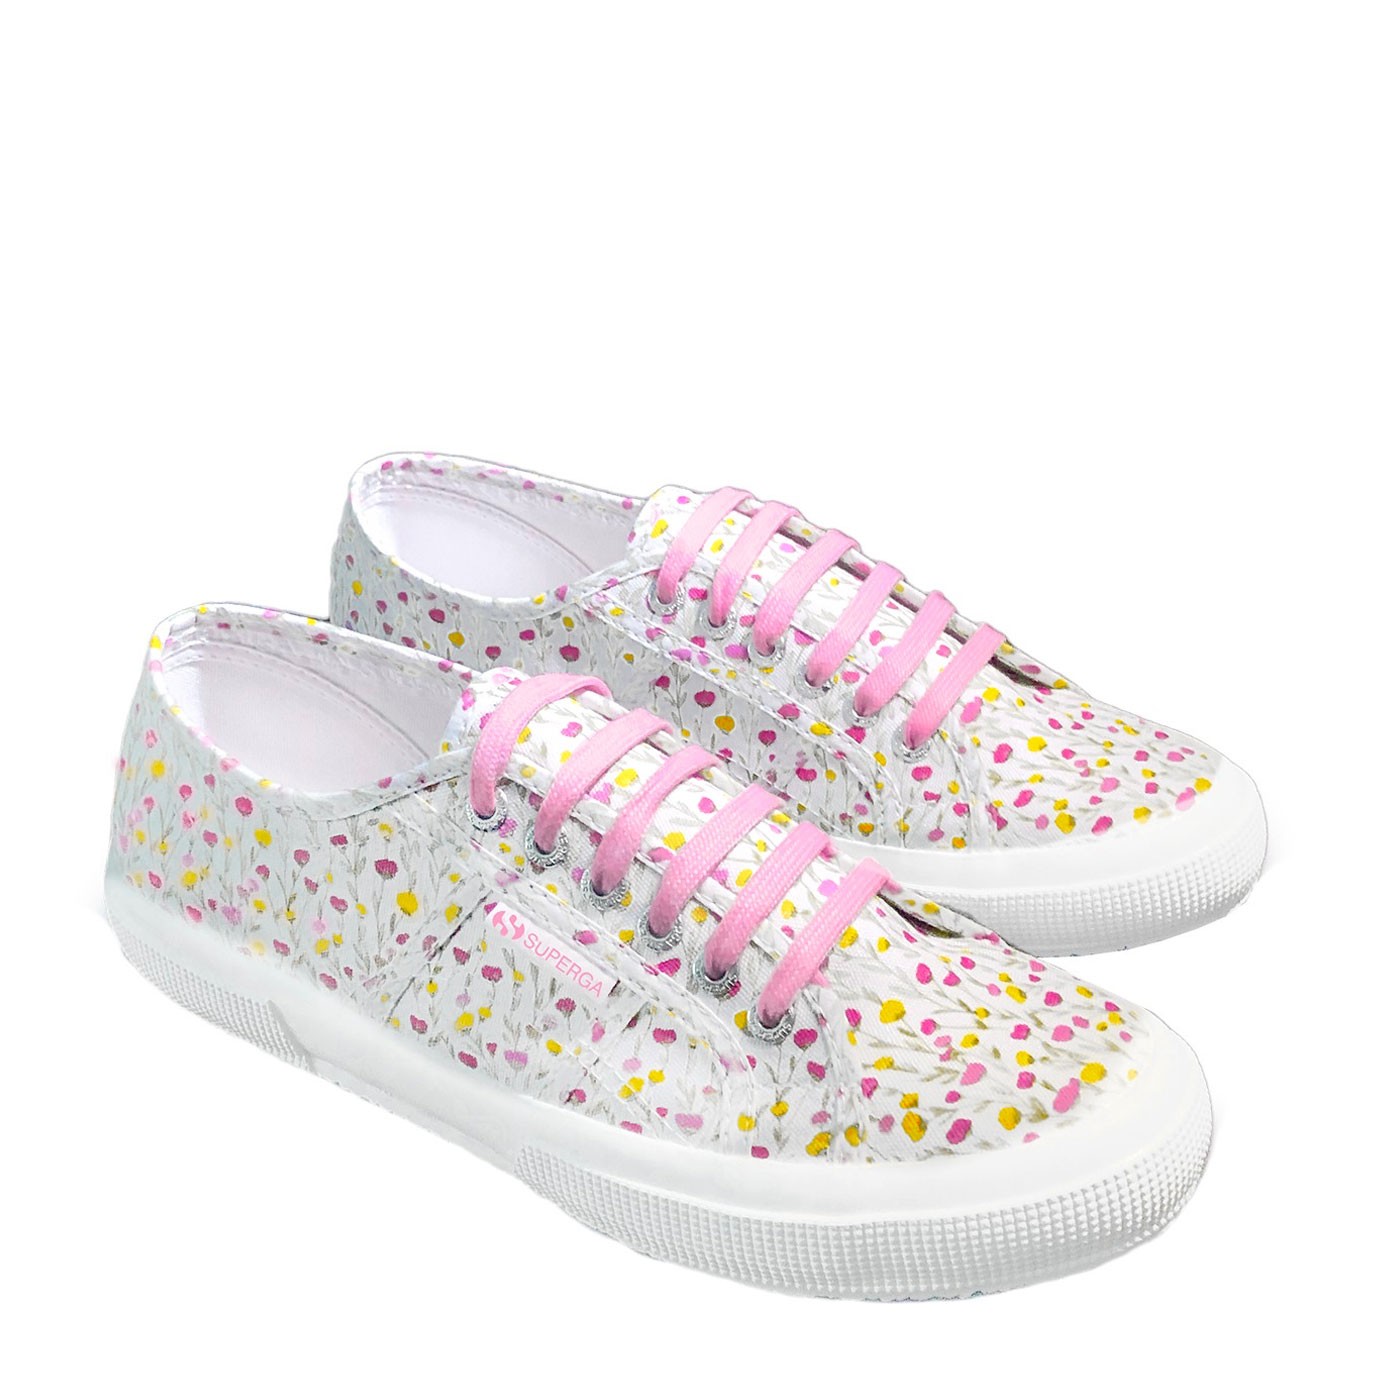 Floral Sneakers Size 37 - Superga 